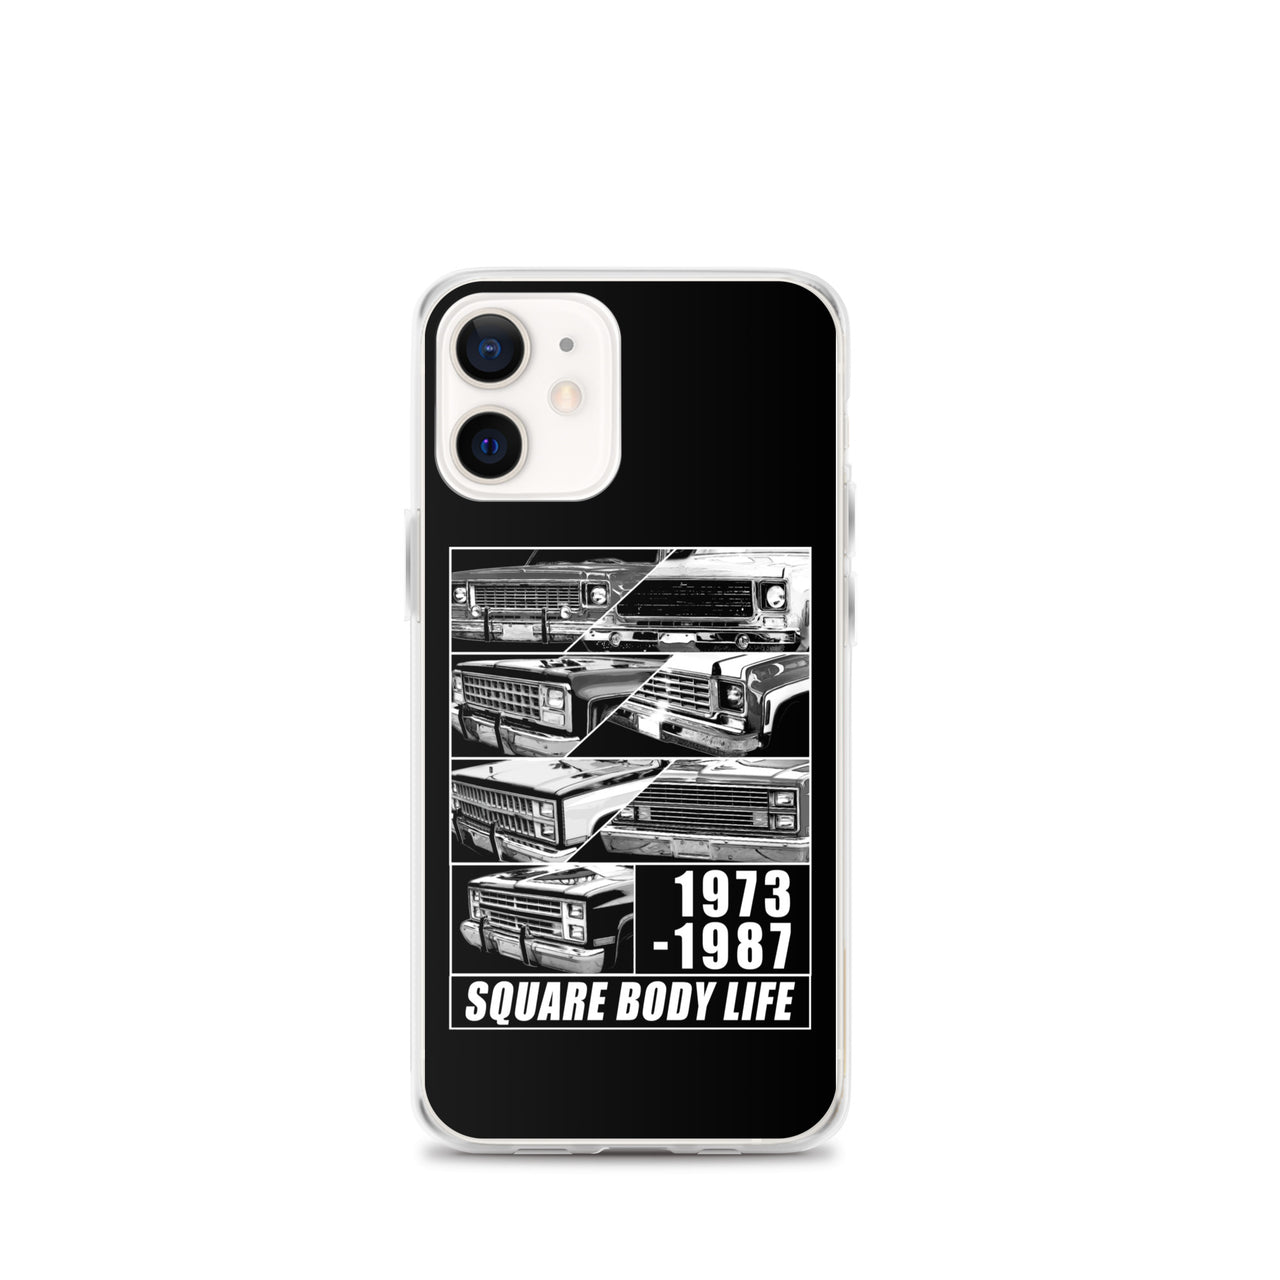 Square Body Truck Grilles Phone Case For iPhone 12 mini